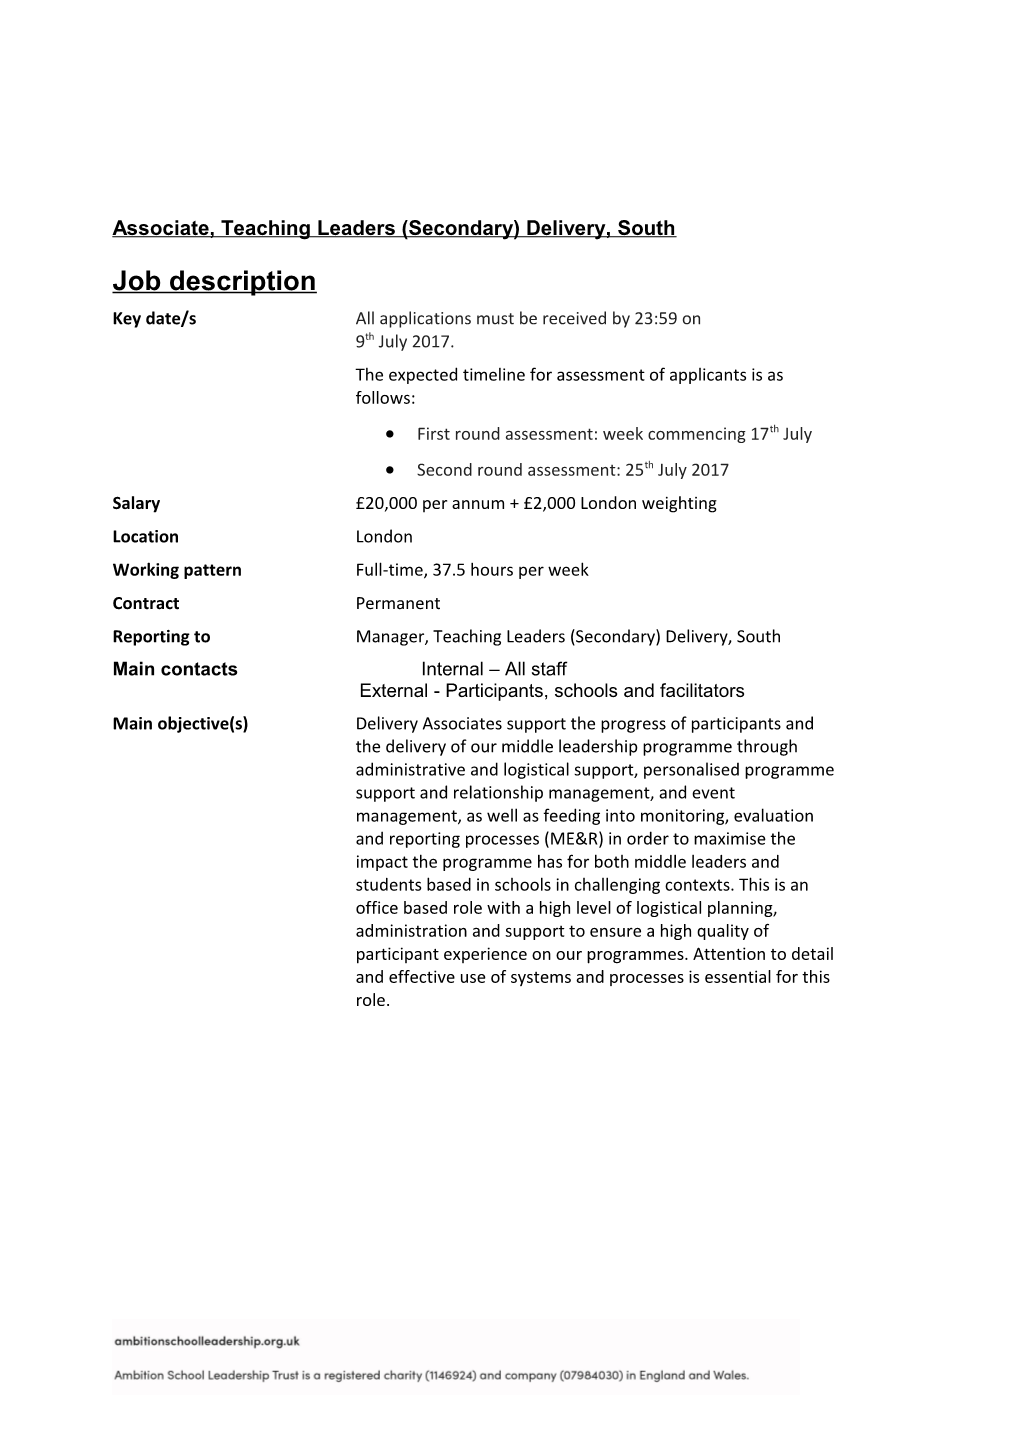 Associate, Teaching Leaders (Secondary) Delivery, South